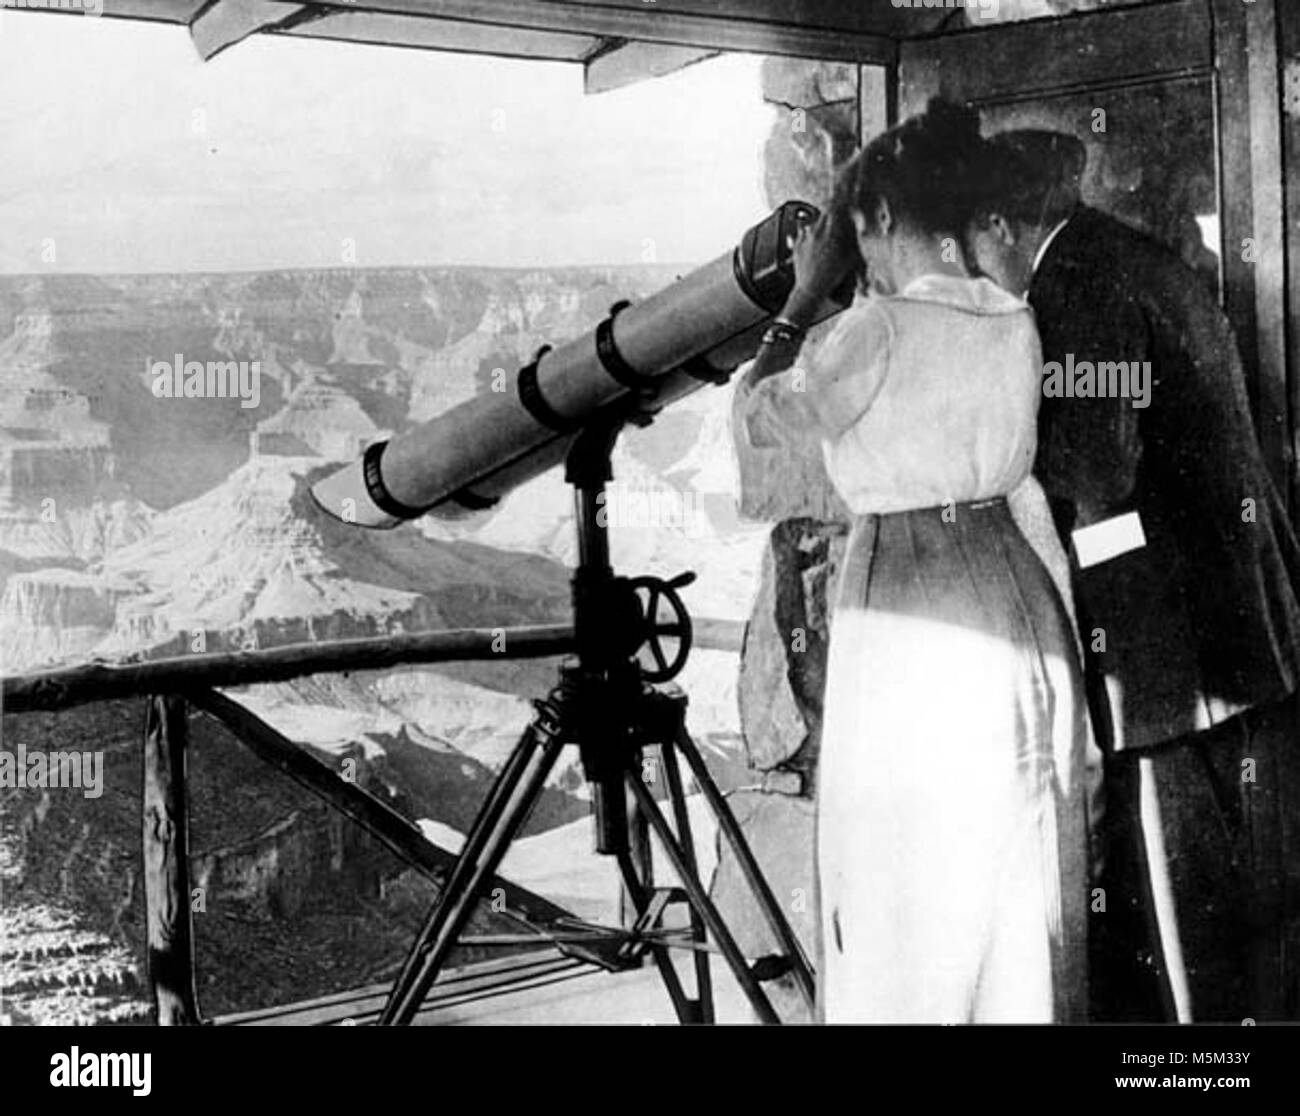 Grand Canyon Historic Lookout Studio  Interior c  . LOOKOUT STUDIO. 'IN THE TELESCOPE TOWER' (CANYON IMAGE PASTED IN WINDOW)  COUPLE VIEWING CANYON. GRCA 50633 CIRCA 1915. FRED HARVEY CO Stock Photo